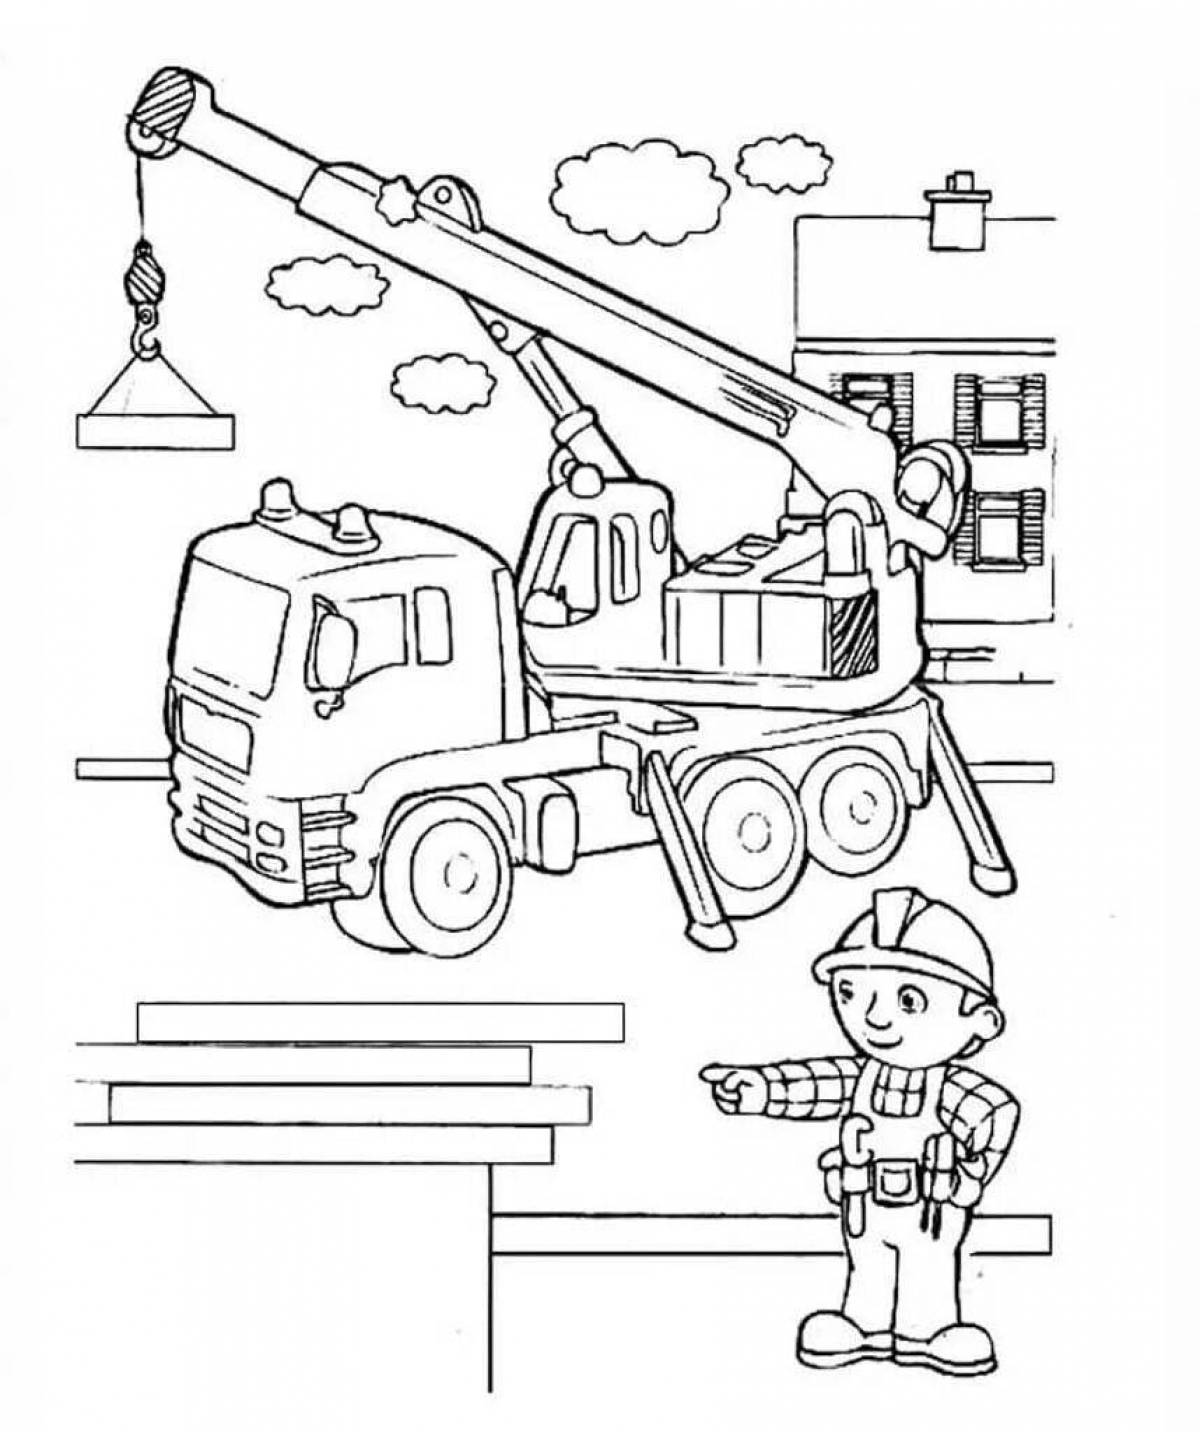 Adorable crane coloring book for 5-6 year olds